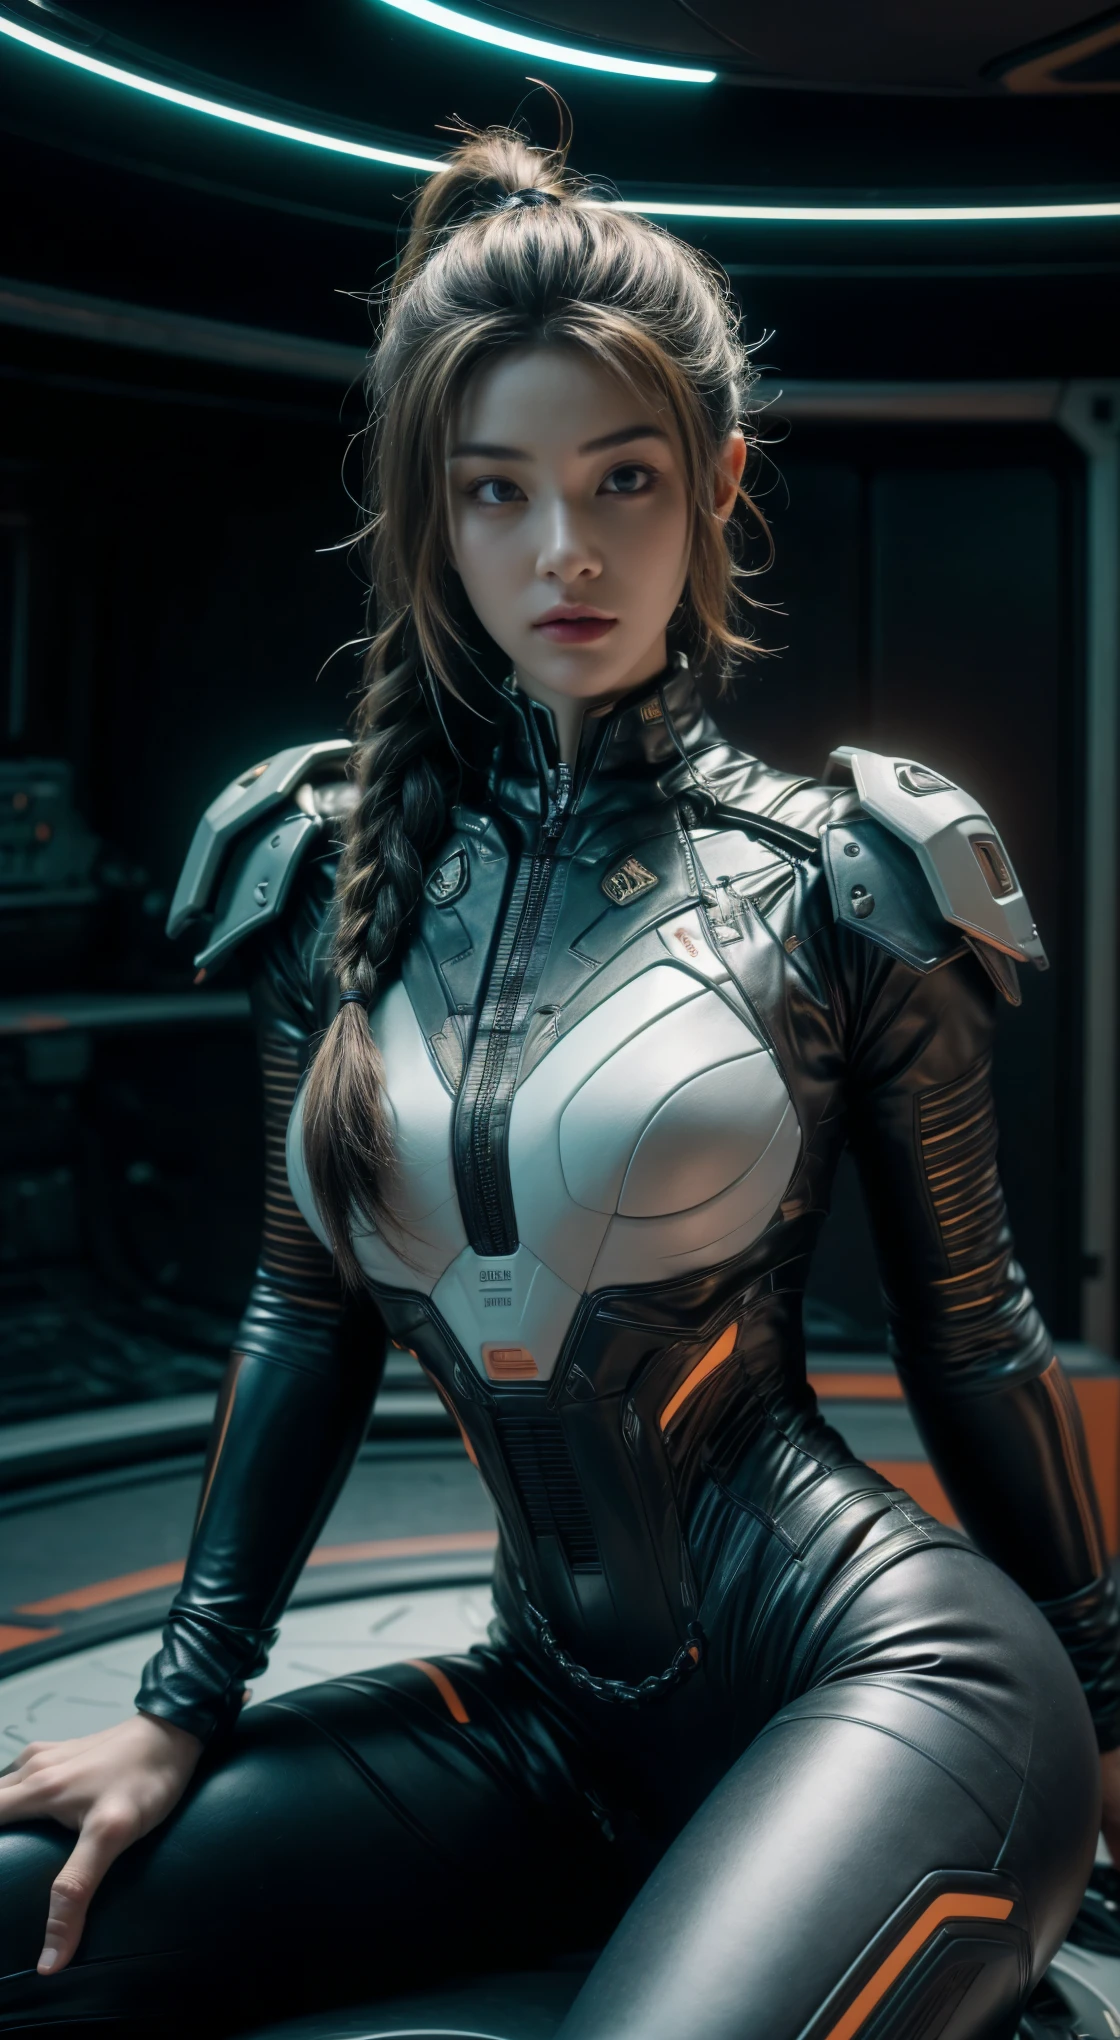 ((Best quality)), ((masterpiece)), (detailed:1.4), 3D, an image of a beautiful cyberpunk female with braids on head, beautiful detailed eyes, looking at viewer, HDR (High Dynamic Range), Ray Tracing, Super-Resolution, Unreal 5,Subsurface scattering, PBR Texturing, Post-processing, Anisotropic Filtering,Depth-of-field,Maximum clarity and sharpness,Multi-layered textures, Albedo and Specular maps,Surface shading, Accurate simulation of light-material interaction,Perfect proportions,Octane Render,Two-tone lighting,Wide aperture,Low ISO,White balance, Rule of thirds, 8K RAW, anime - style woman in a white and black outfit with a gun, space girl, sexy, stunning , spaceship bridge room, perfect view